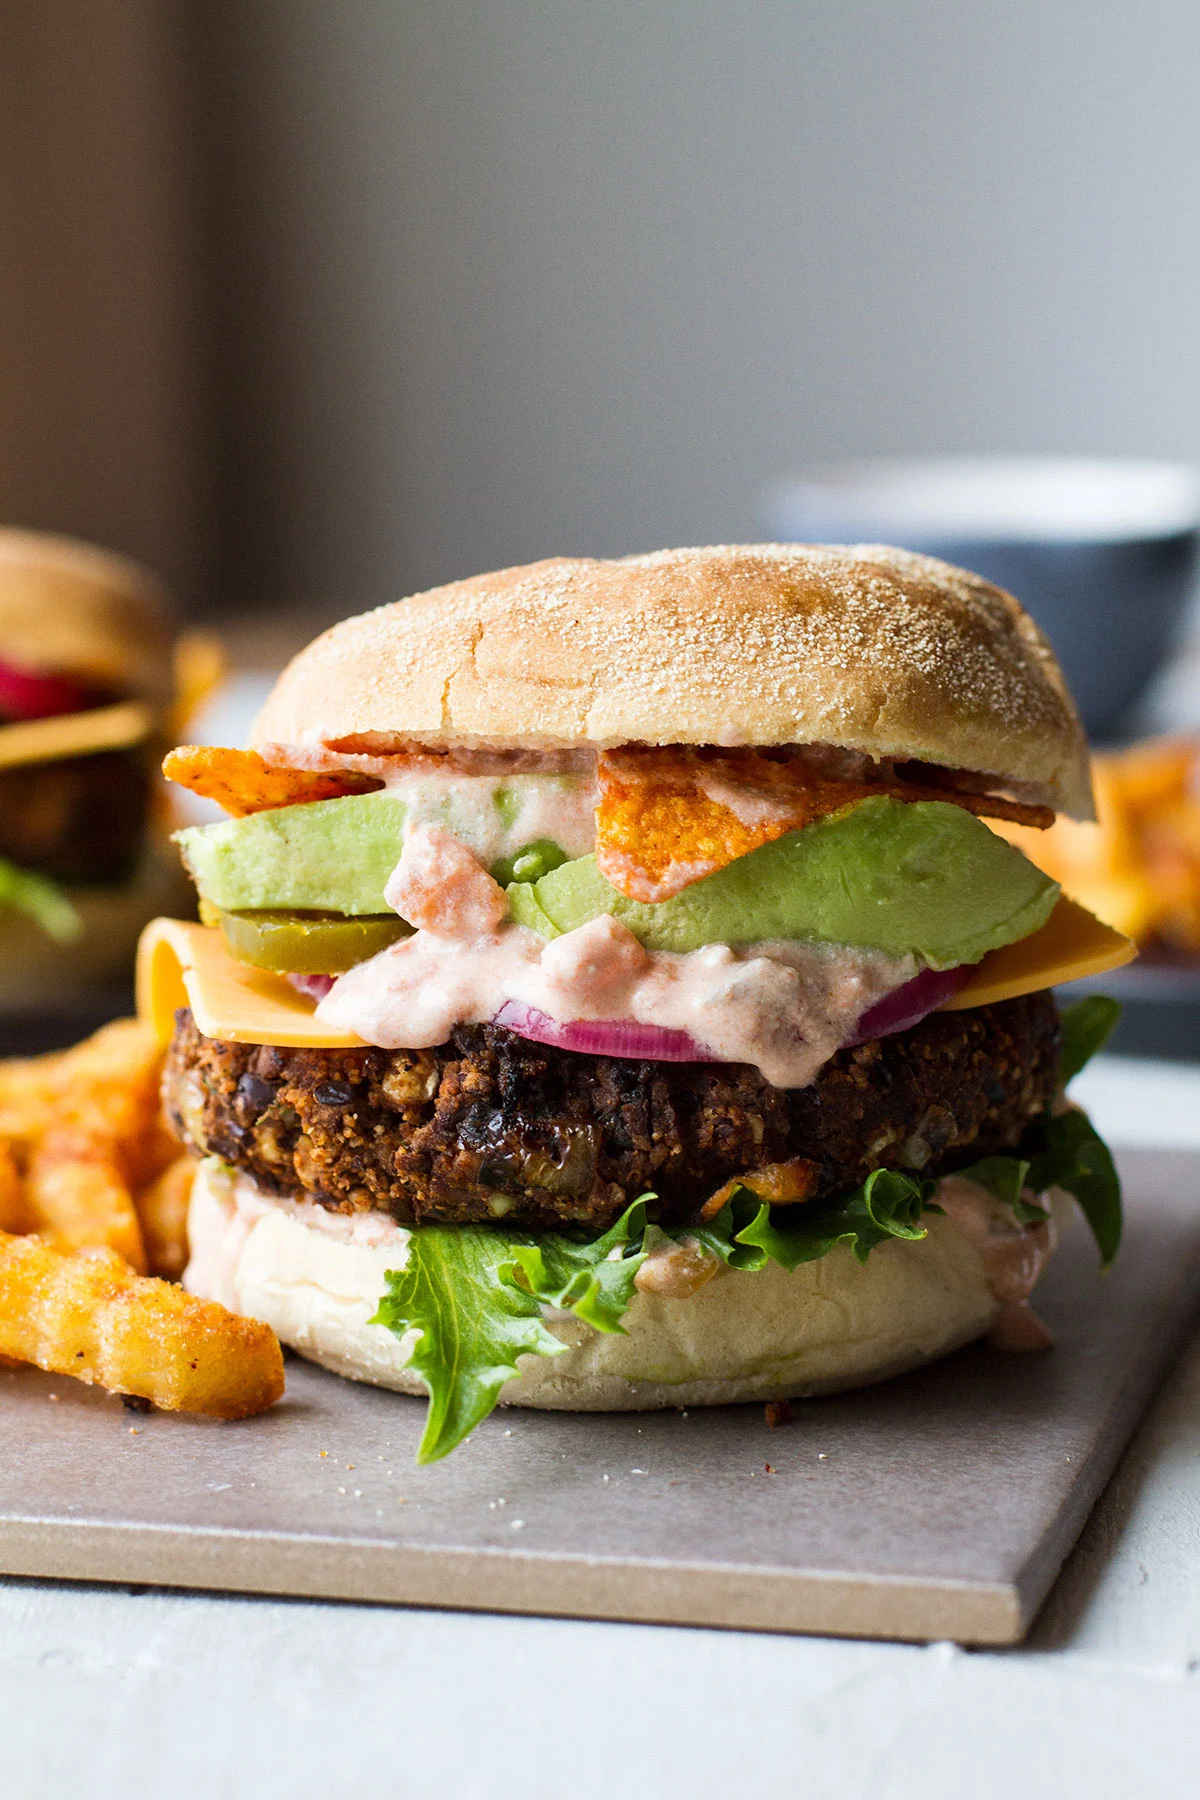 Vegetarian burger with lots of sauce and avocado.